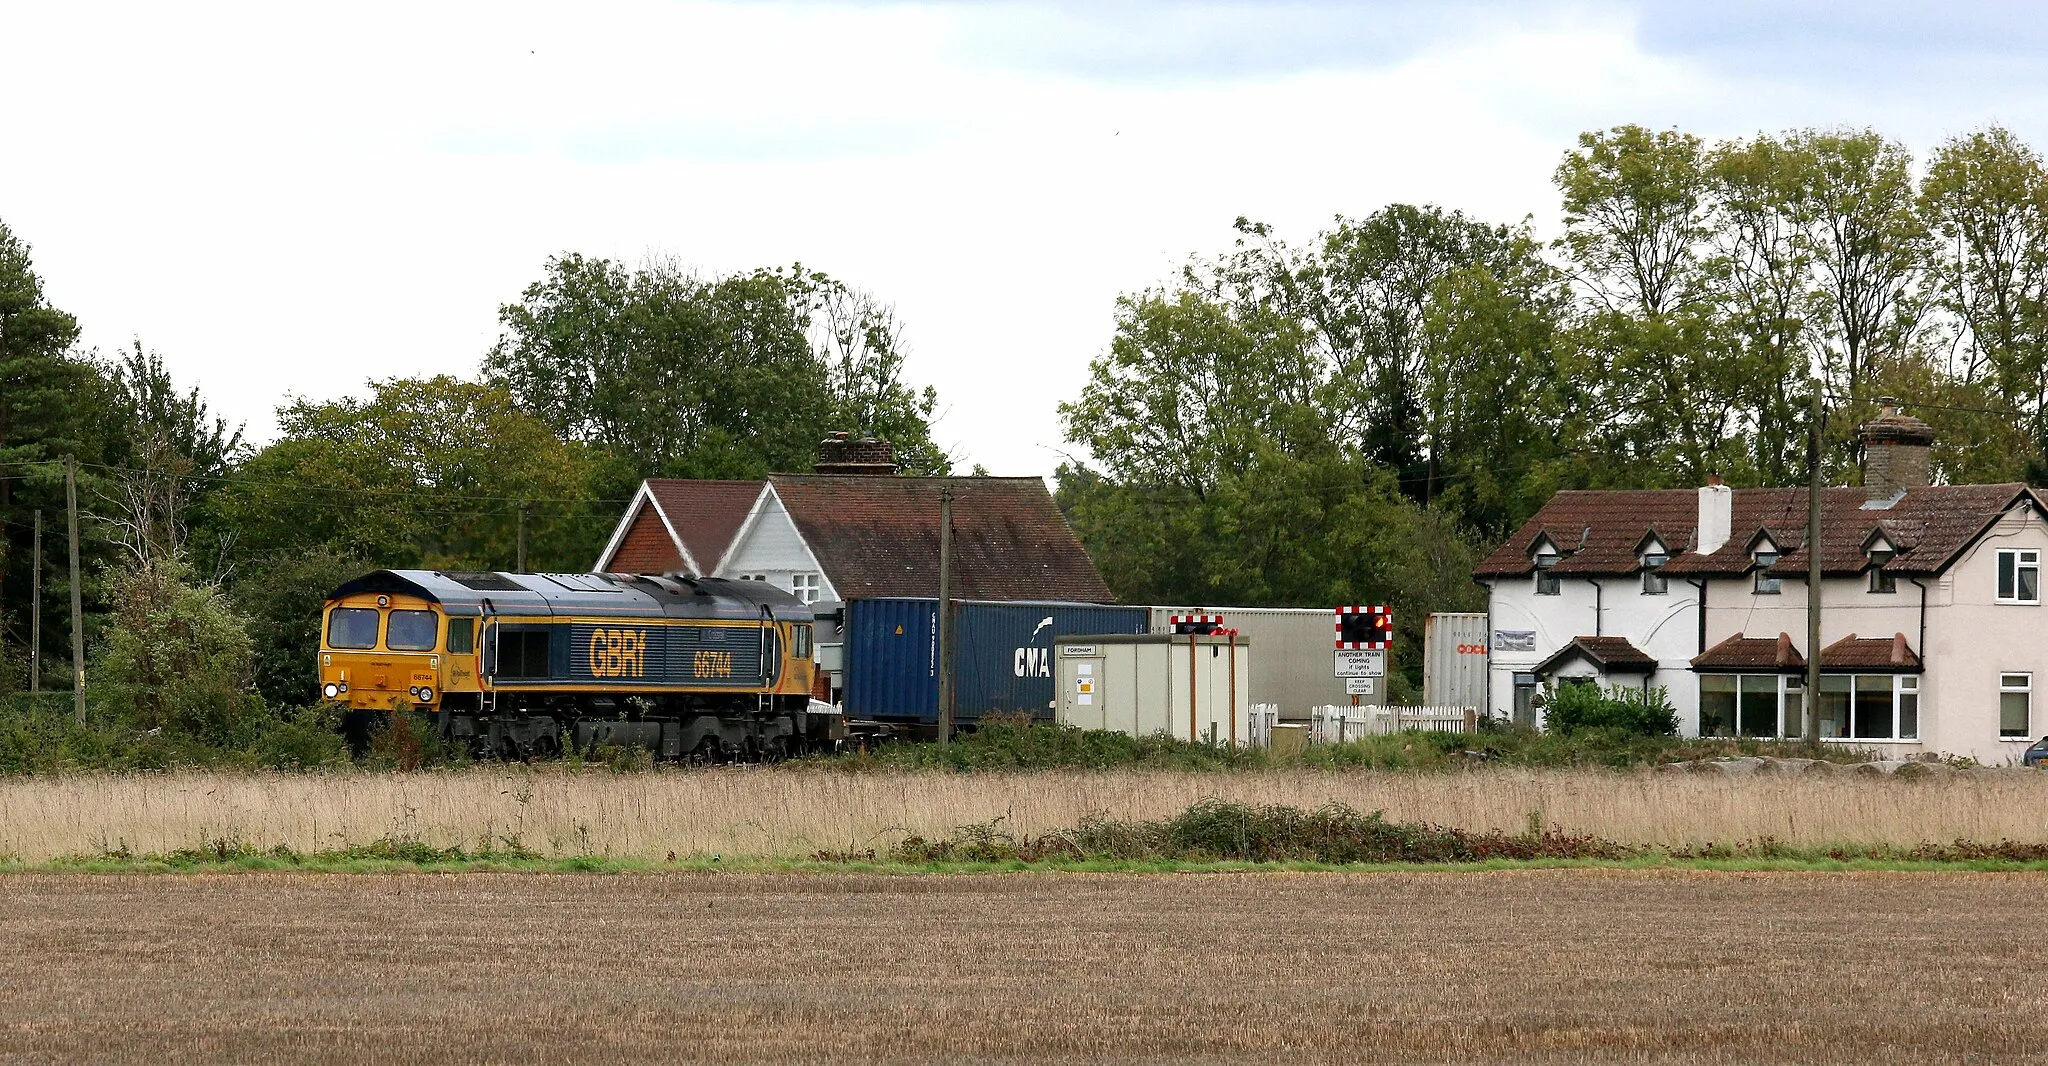 Photo showing: 4Z26 1313 Felixstowe North Gbrf to Masborough N&W GBRF running 20 mins early speeds sacross Fordham Level Crossing near newmarket with 66 744 "Crossrail" in charge.